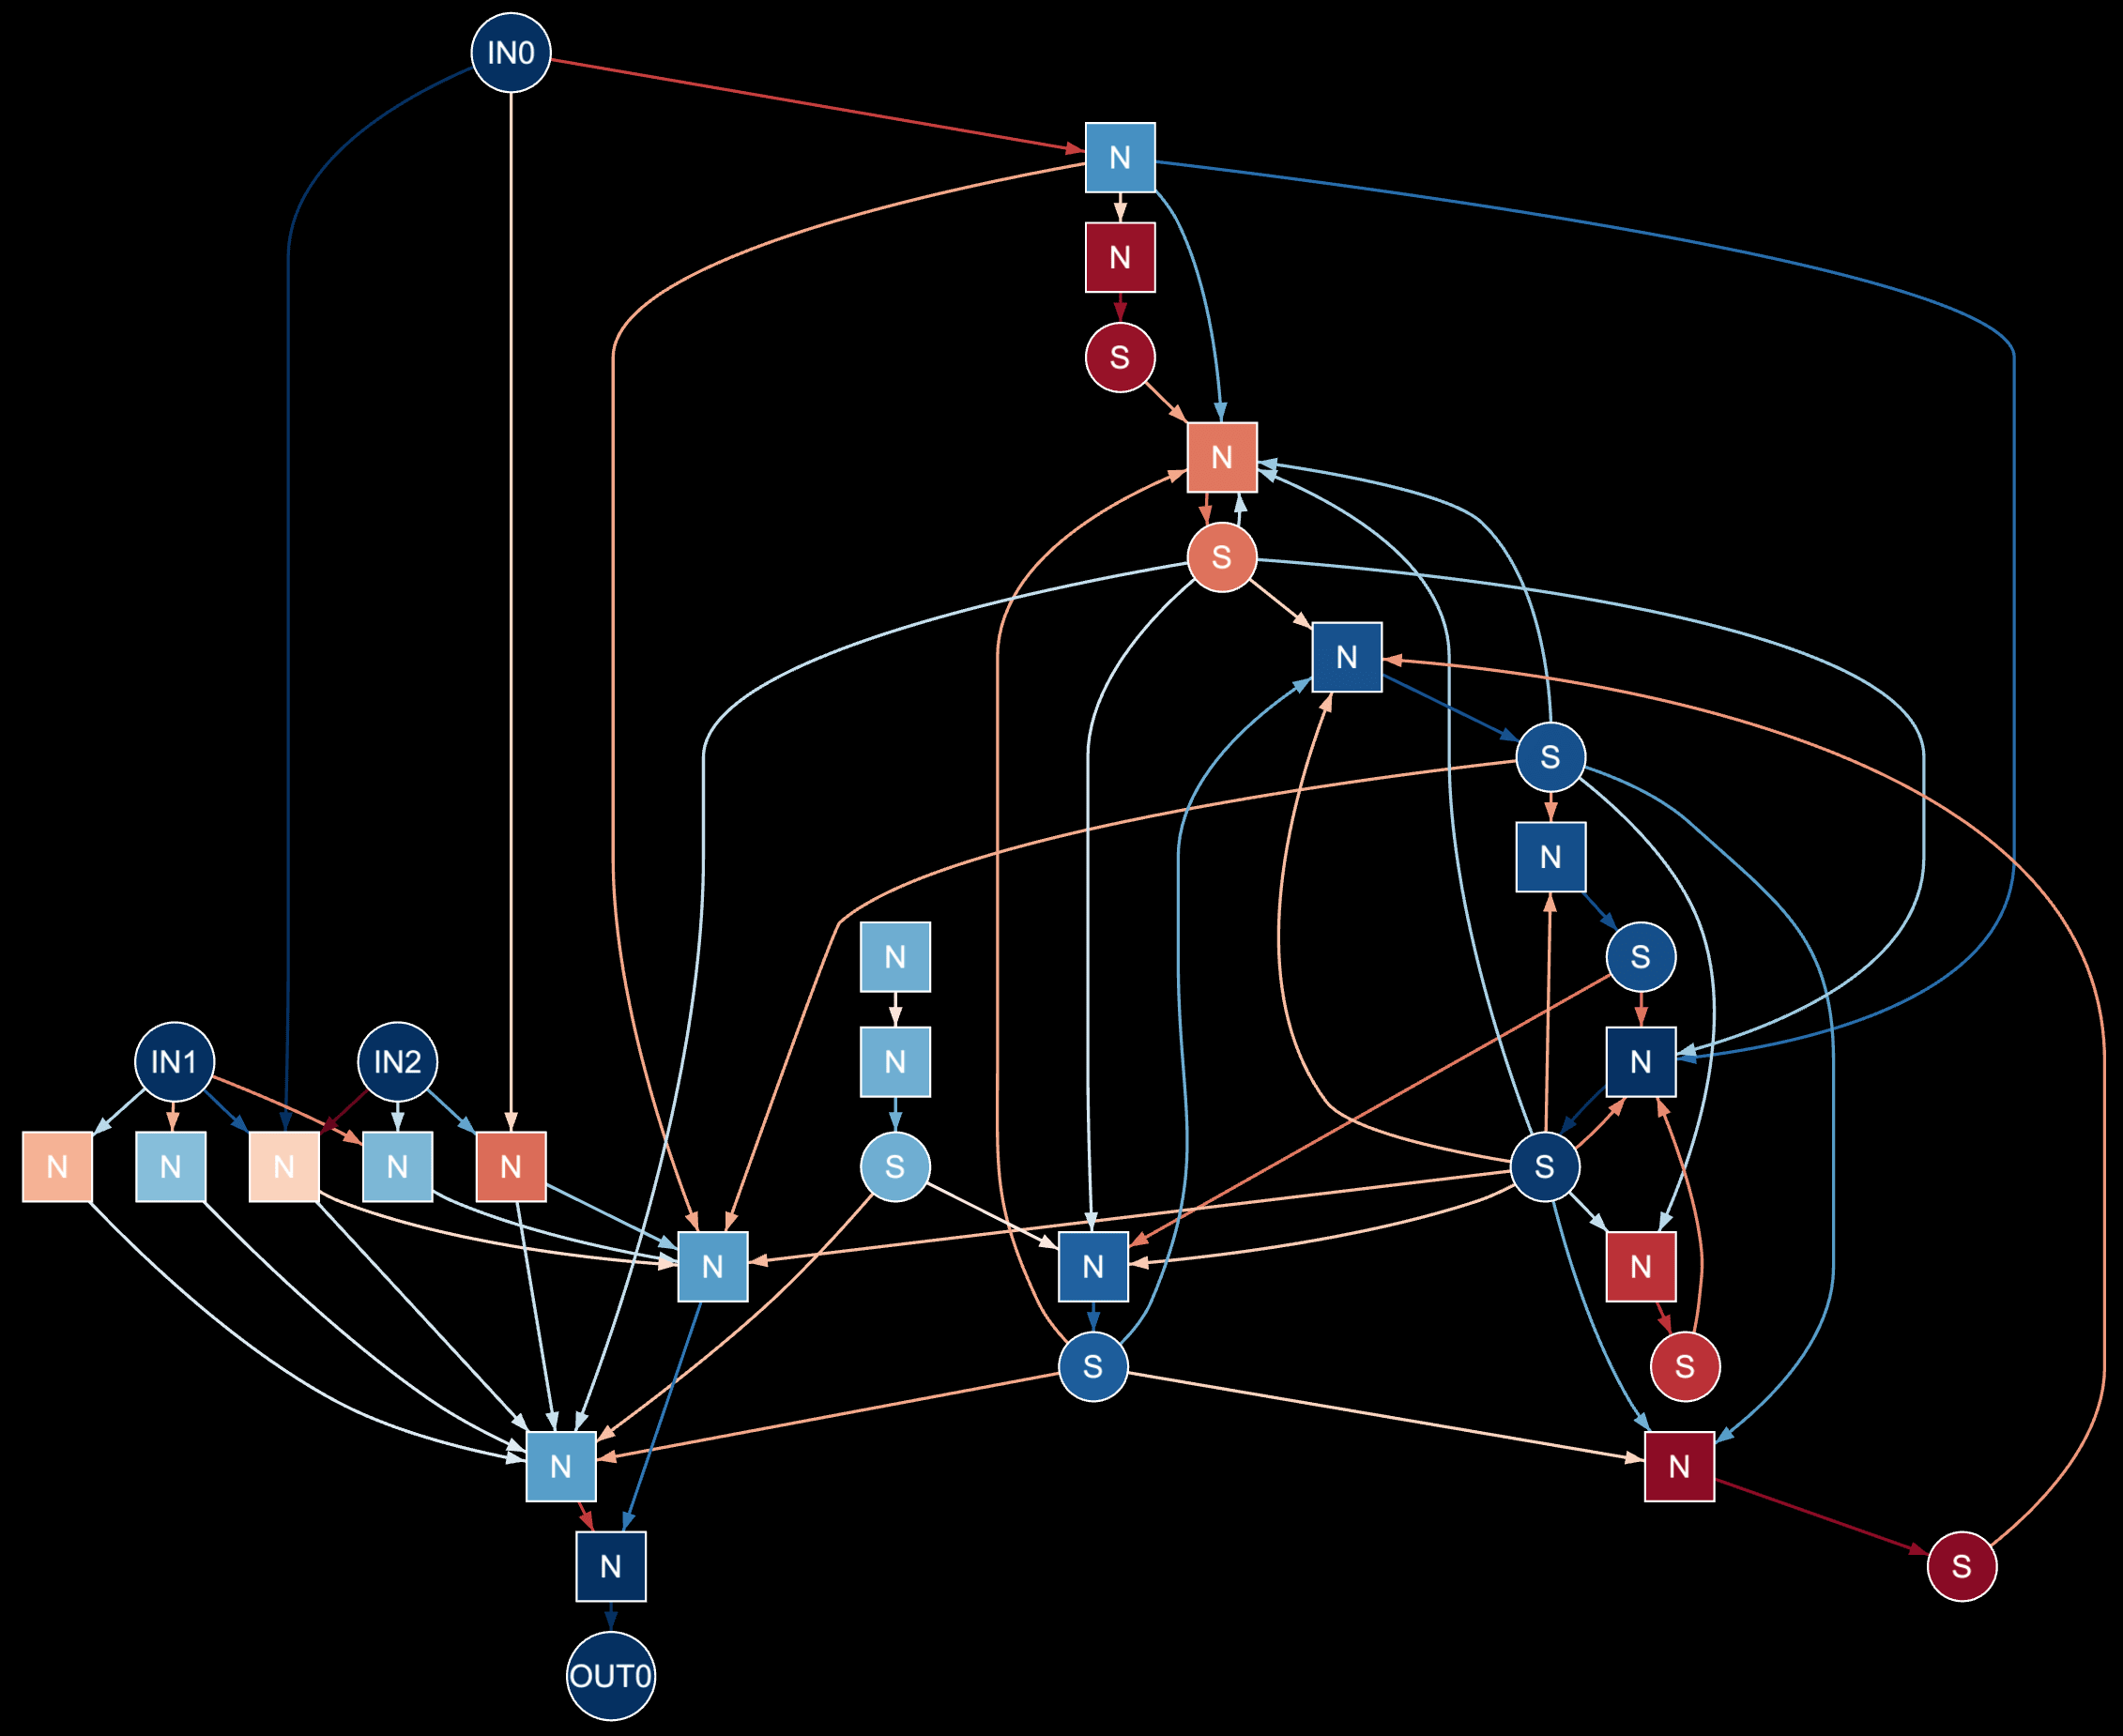 A visualization of a sparse computational graph pruned from a RNN. Square nodes represent neurons and circles are states from the previous timestep. Nodes and edges are according to their current output with blue being negative and red positive."/><meta data-react-helmet="true" name="twitter:image:alt" content="A visualization of a sparse computational graph pruned from a RNN. Square nodes represent neurons and circles are states from the previous timestep. Nodes and edges are according to their current output with blue being negative and red positive.